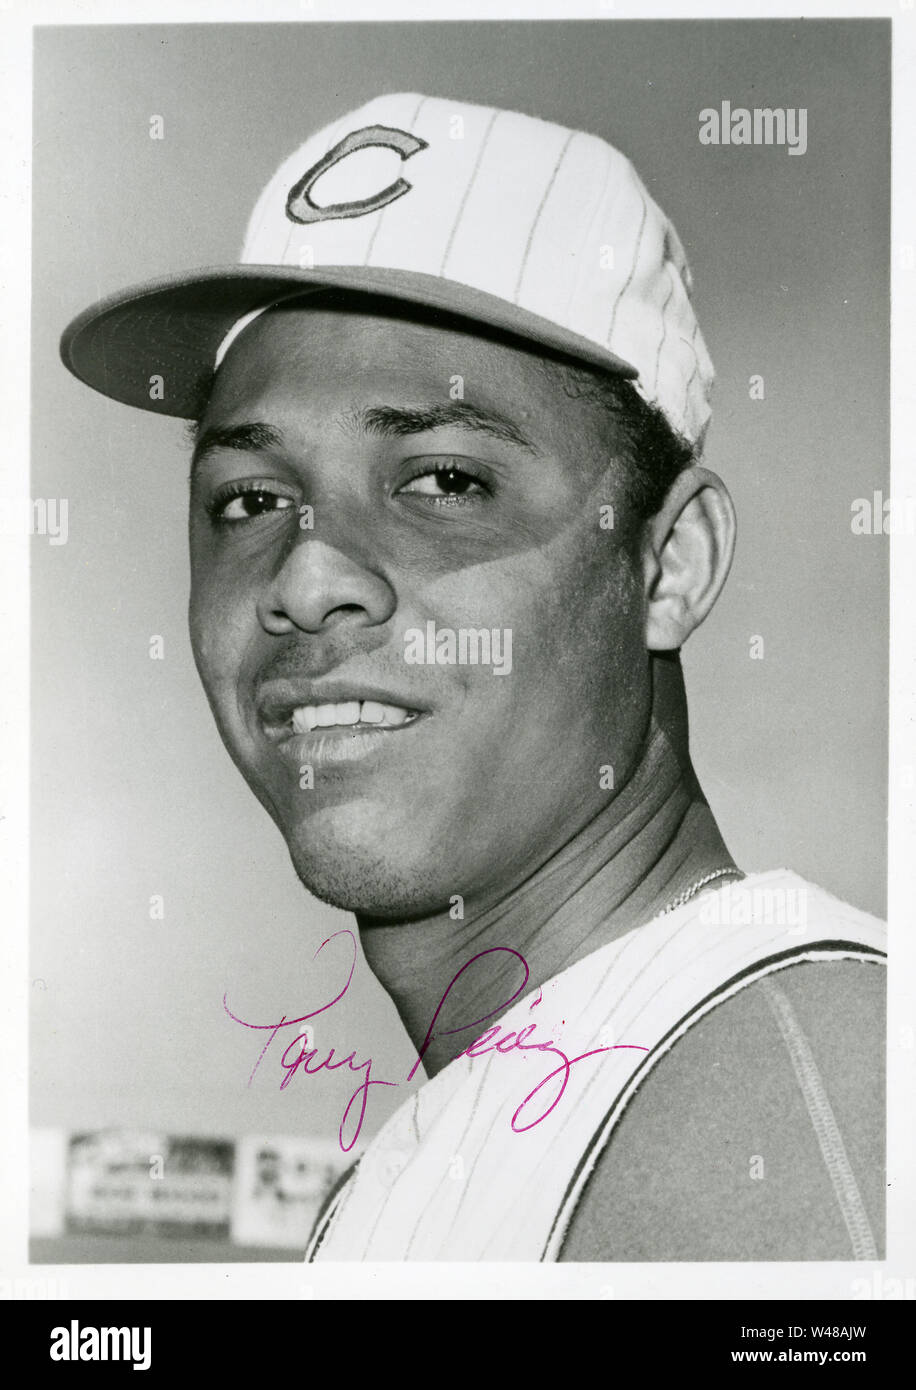 Tony perez hi-res stock photography and images - Alamy